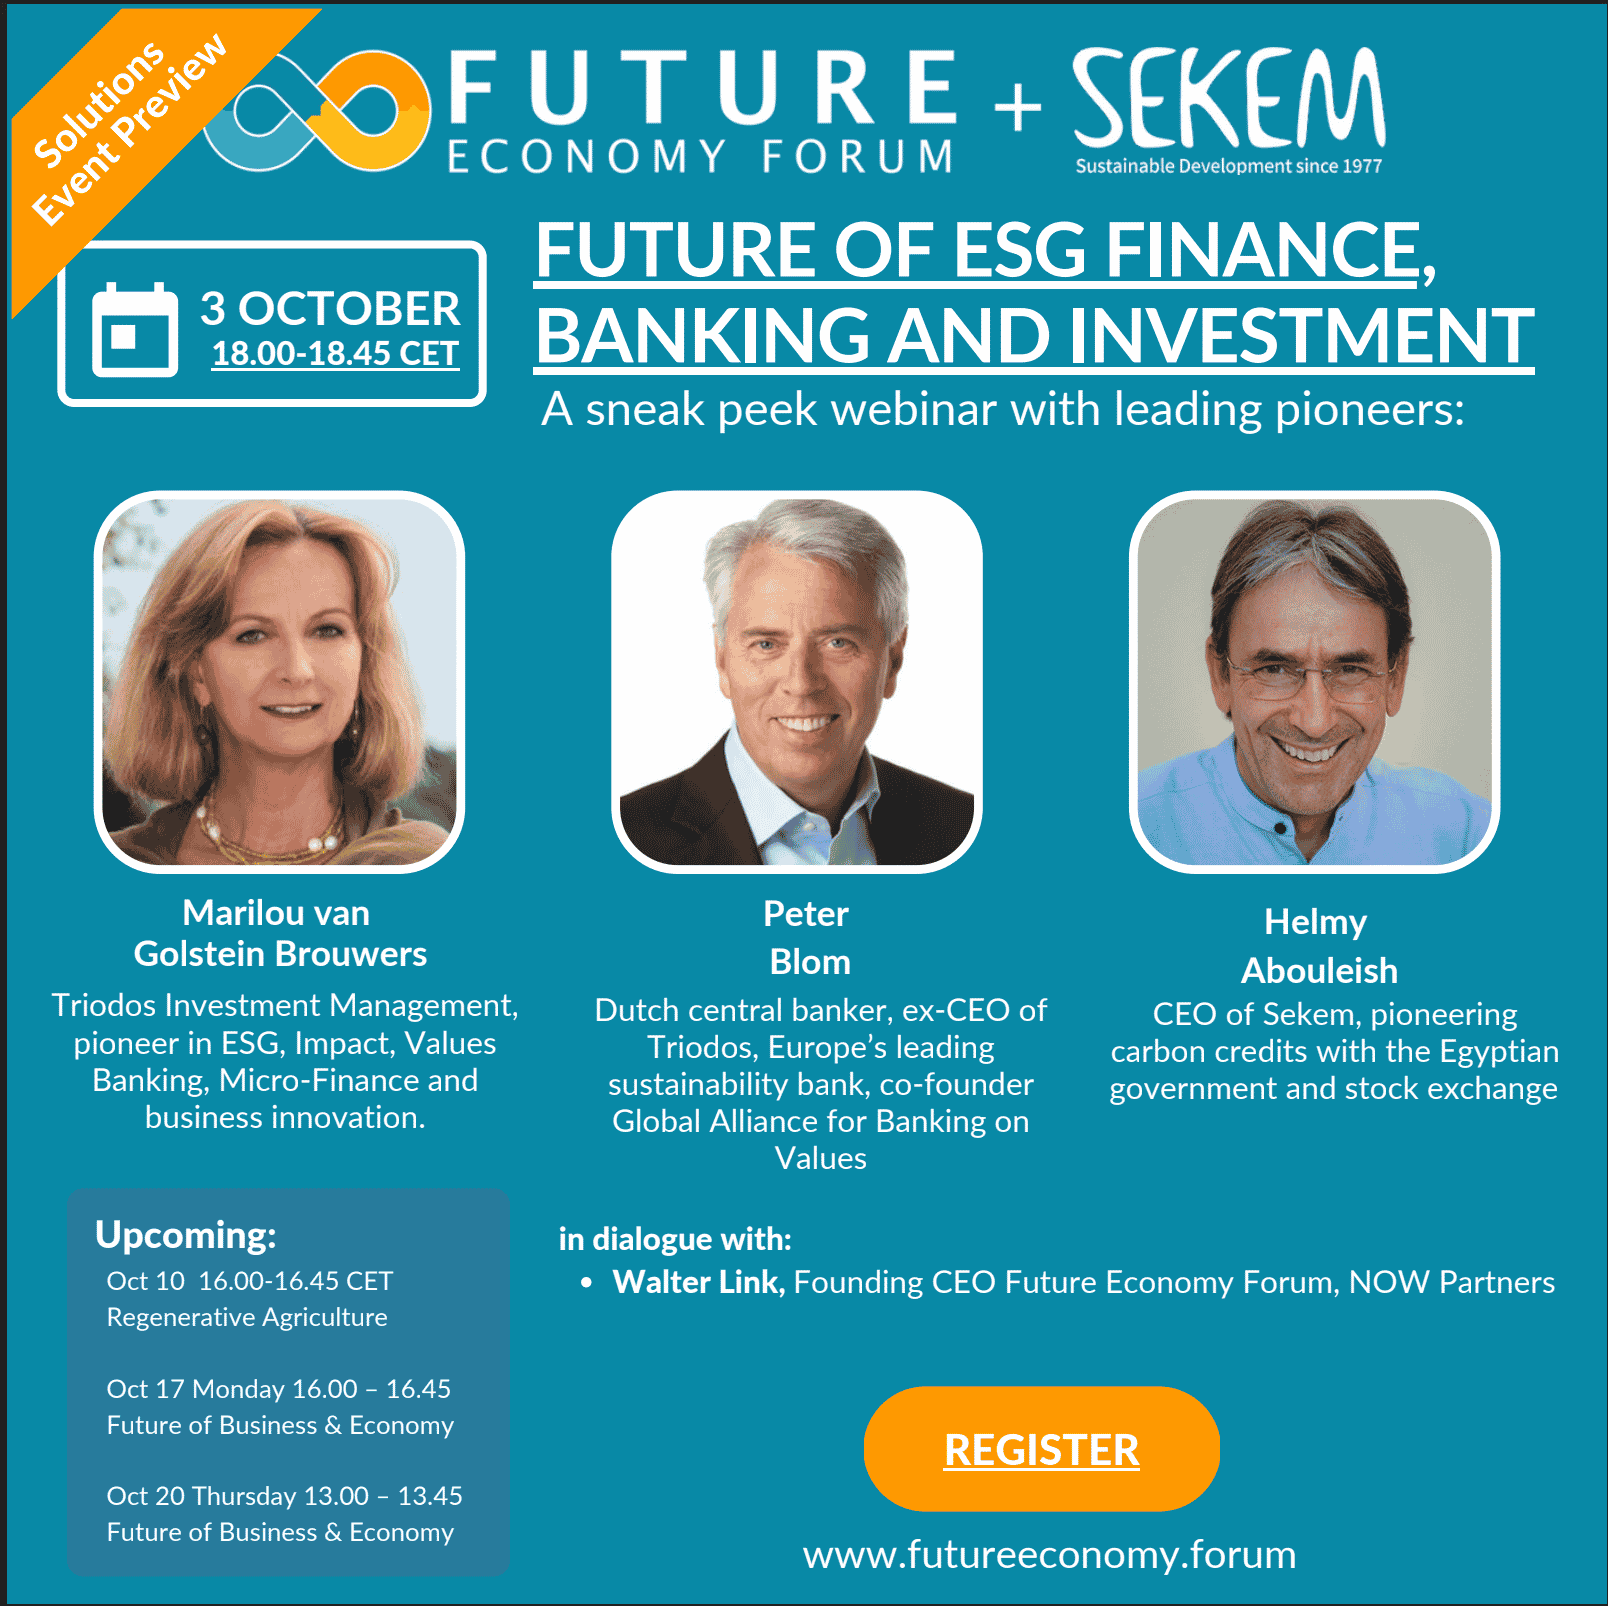 Webinar Invitetion  | Future of ESG Finance, Banking and Investment - with leading pioneers